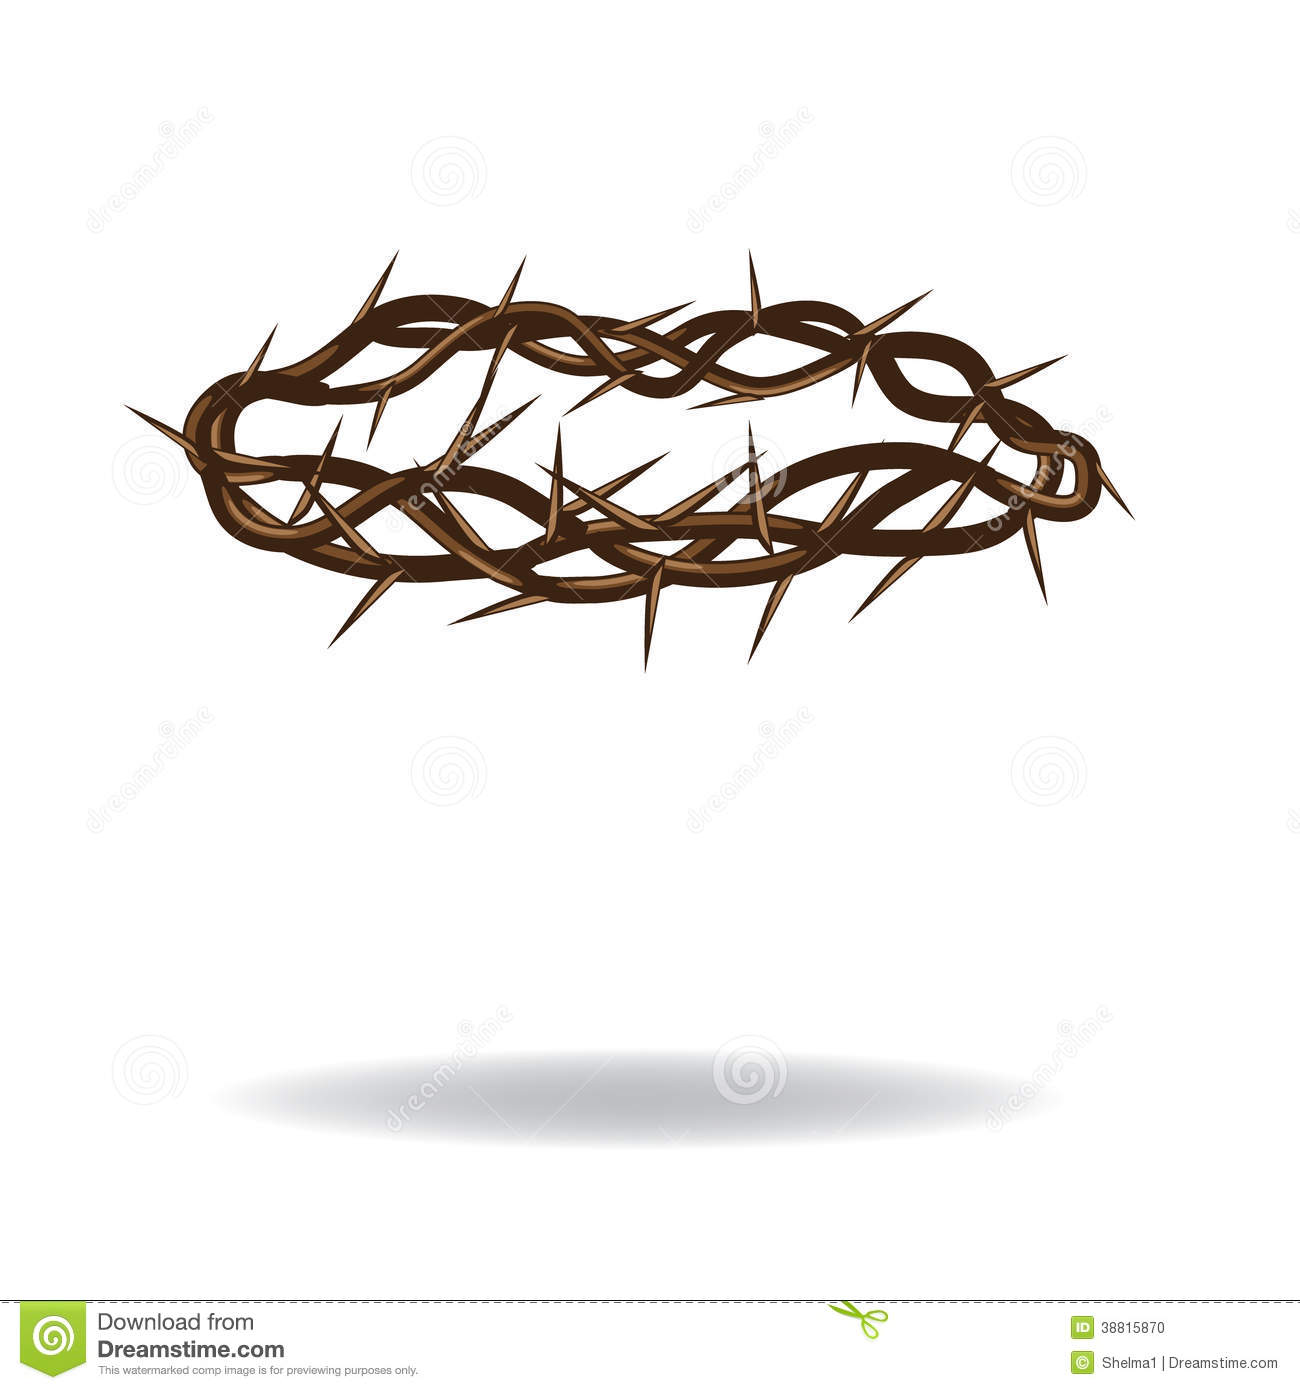 crown of thorns clipart - photo #32